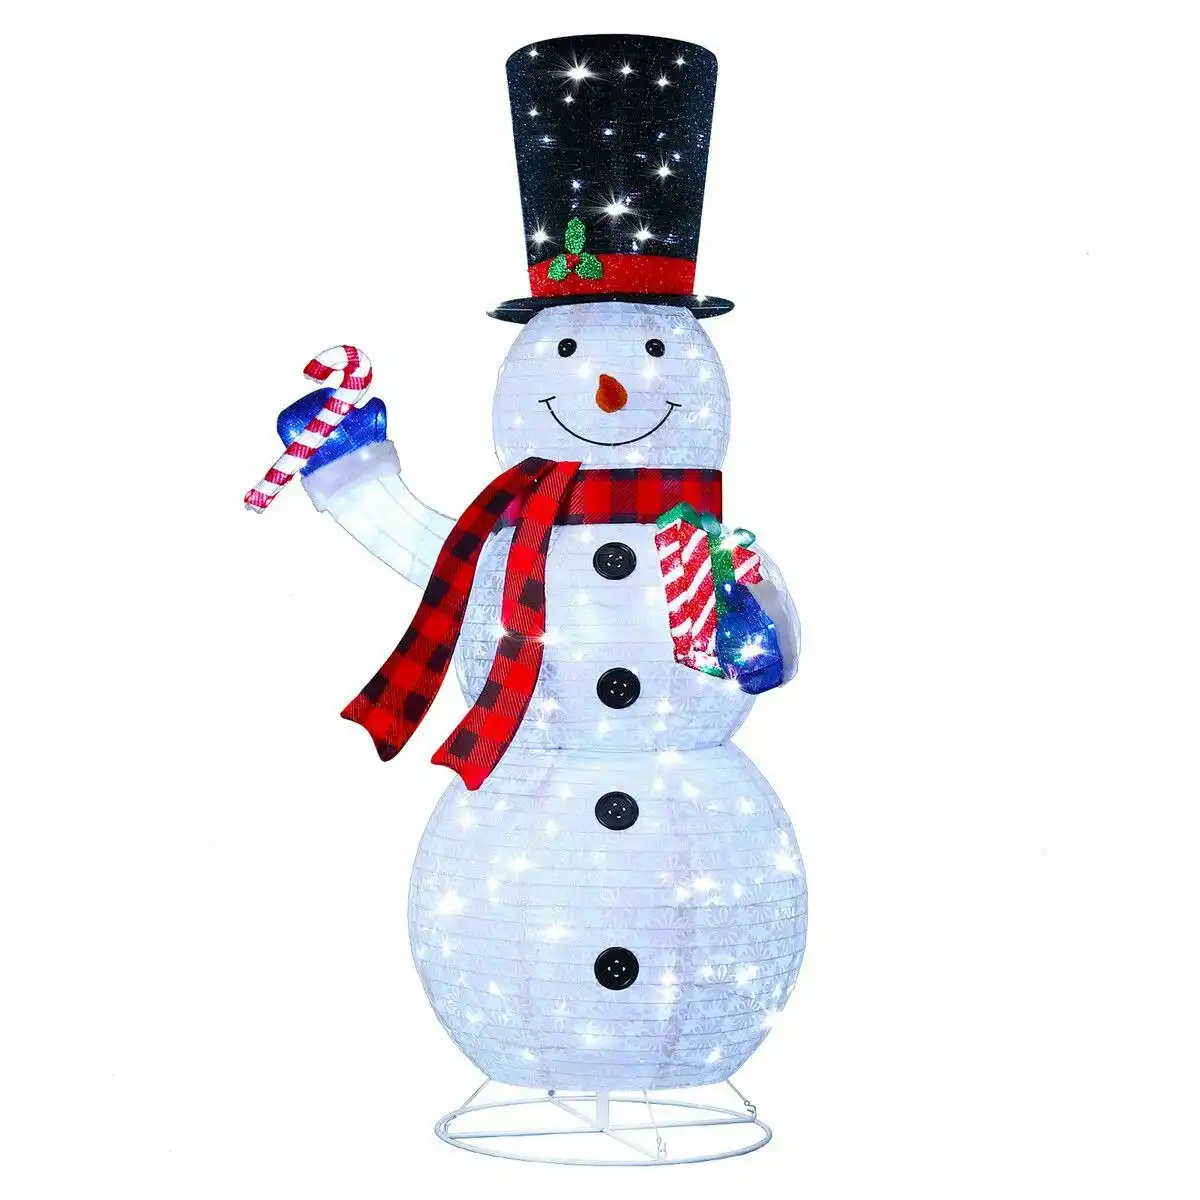 Solight 180cm Snowman Christmas Light Outdoor Decor LED Fairy String Ornament Top Hat Candy Cane Xmas Gift Box Collapsible Figurine Holiday 8 Flash Modes